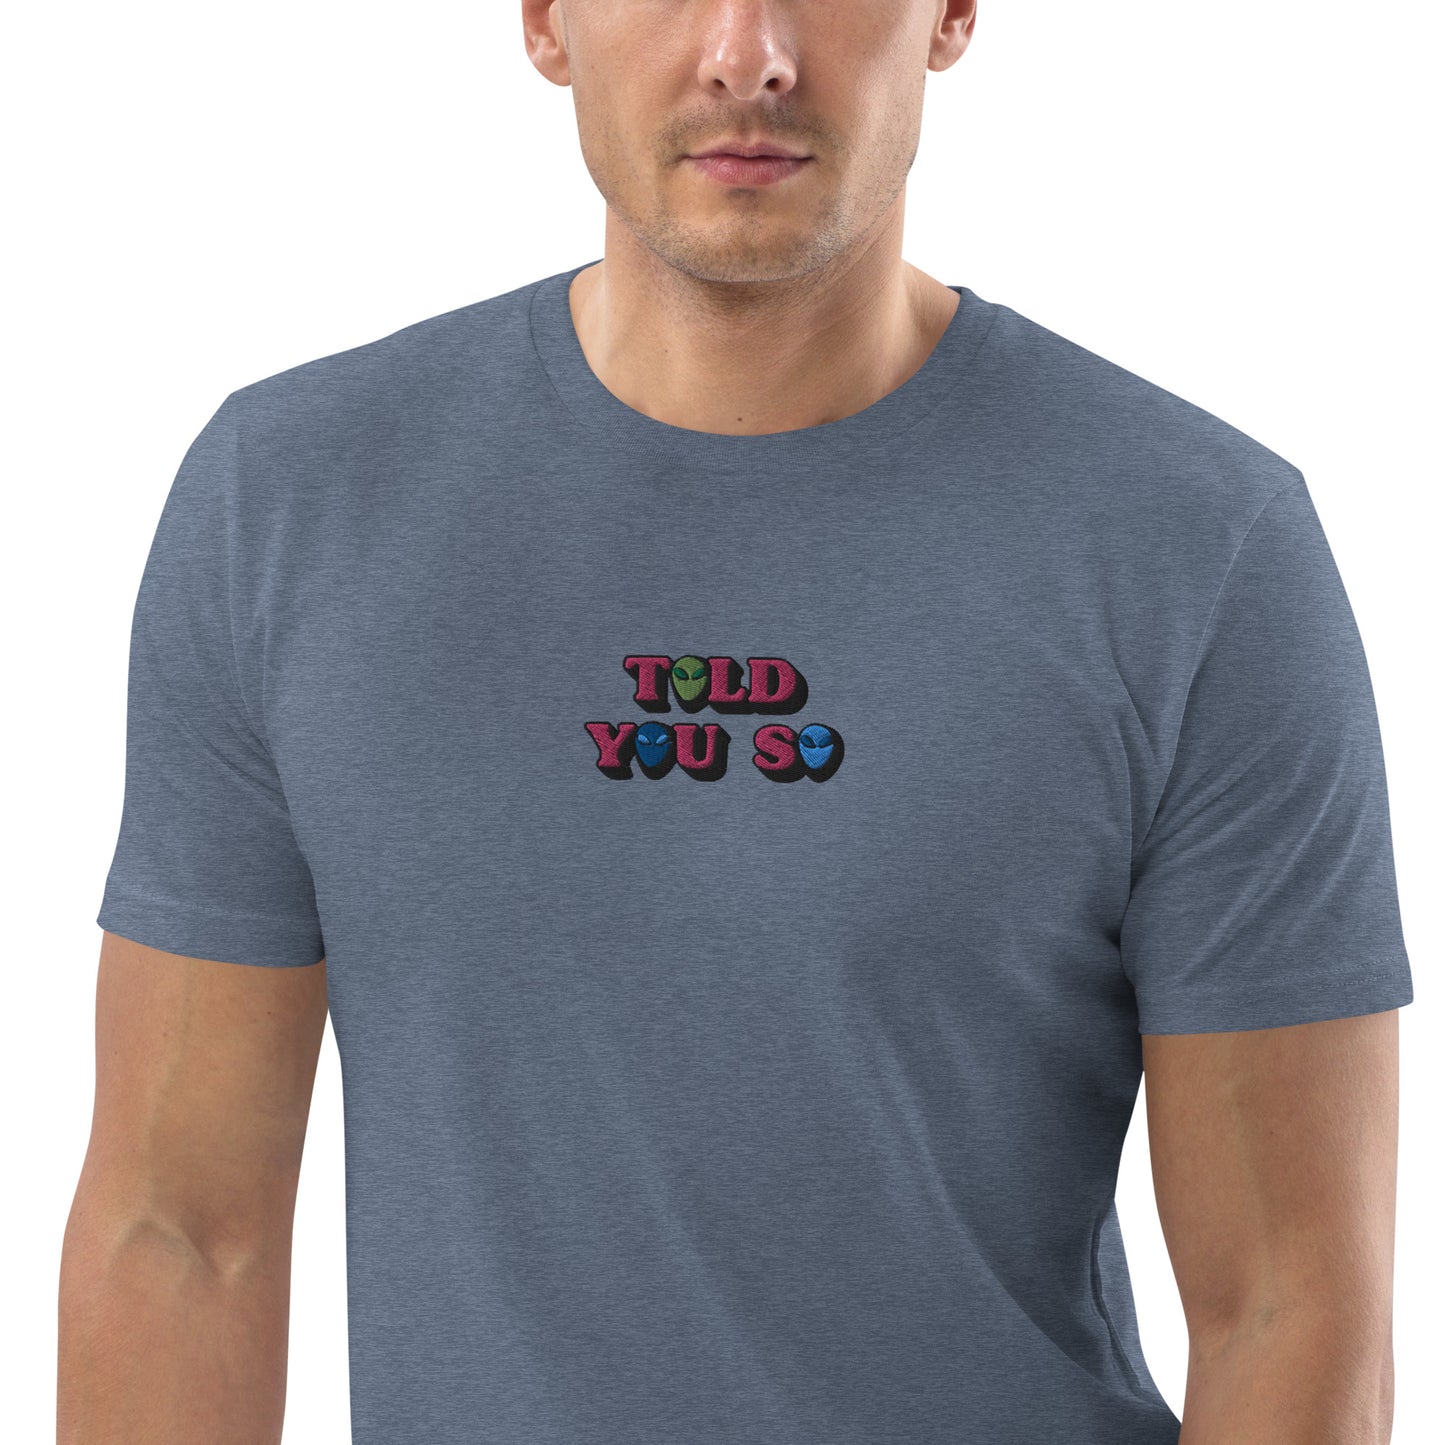 Weirdo | This organic cotton T-shirt for men is actually unisex, so also women can wear it. This grey blueish shirt has our ‘TOLD YOU SO’ funny meme, embroidered at the front of the T-shirt.